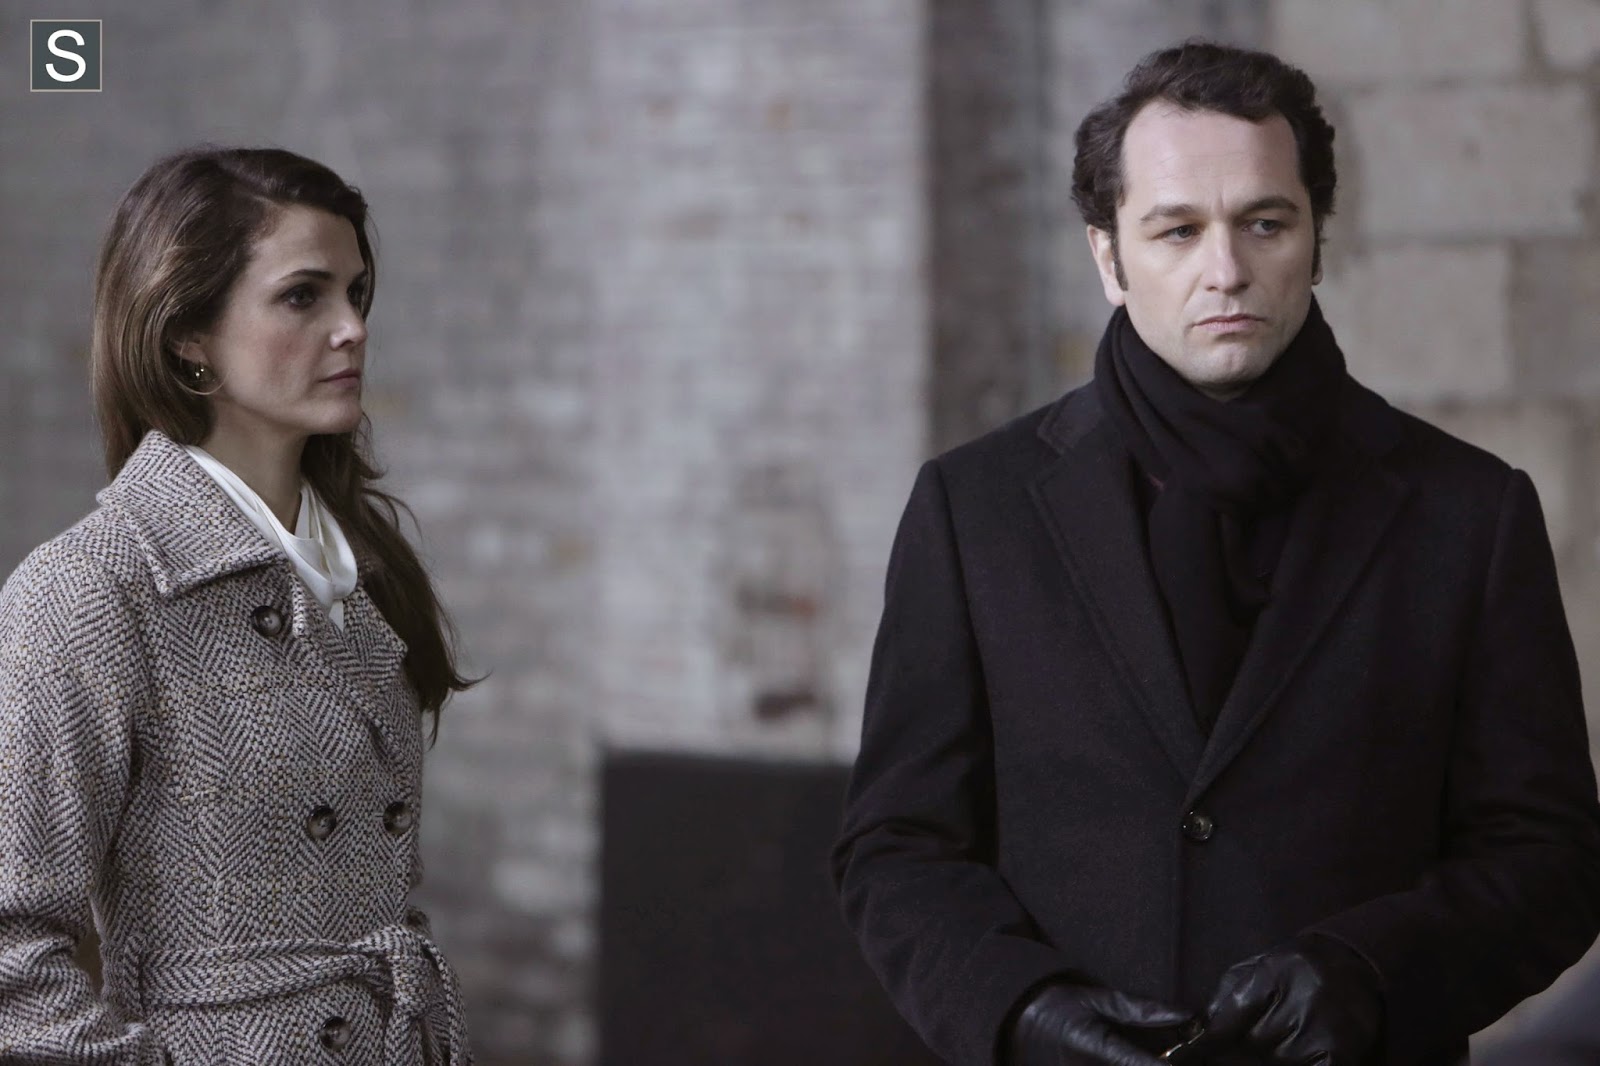 The Americans - Episode 2.10 - Yousaf - Advance Review